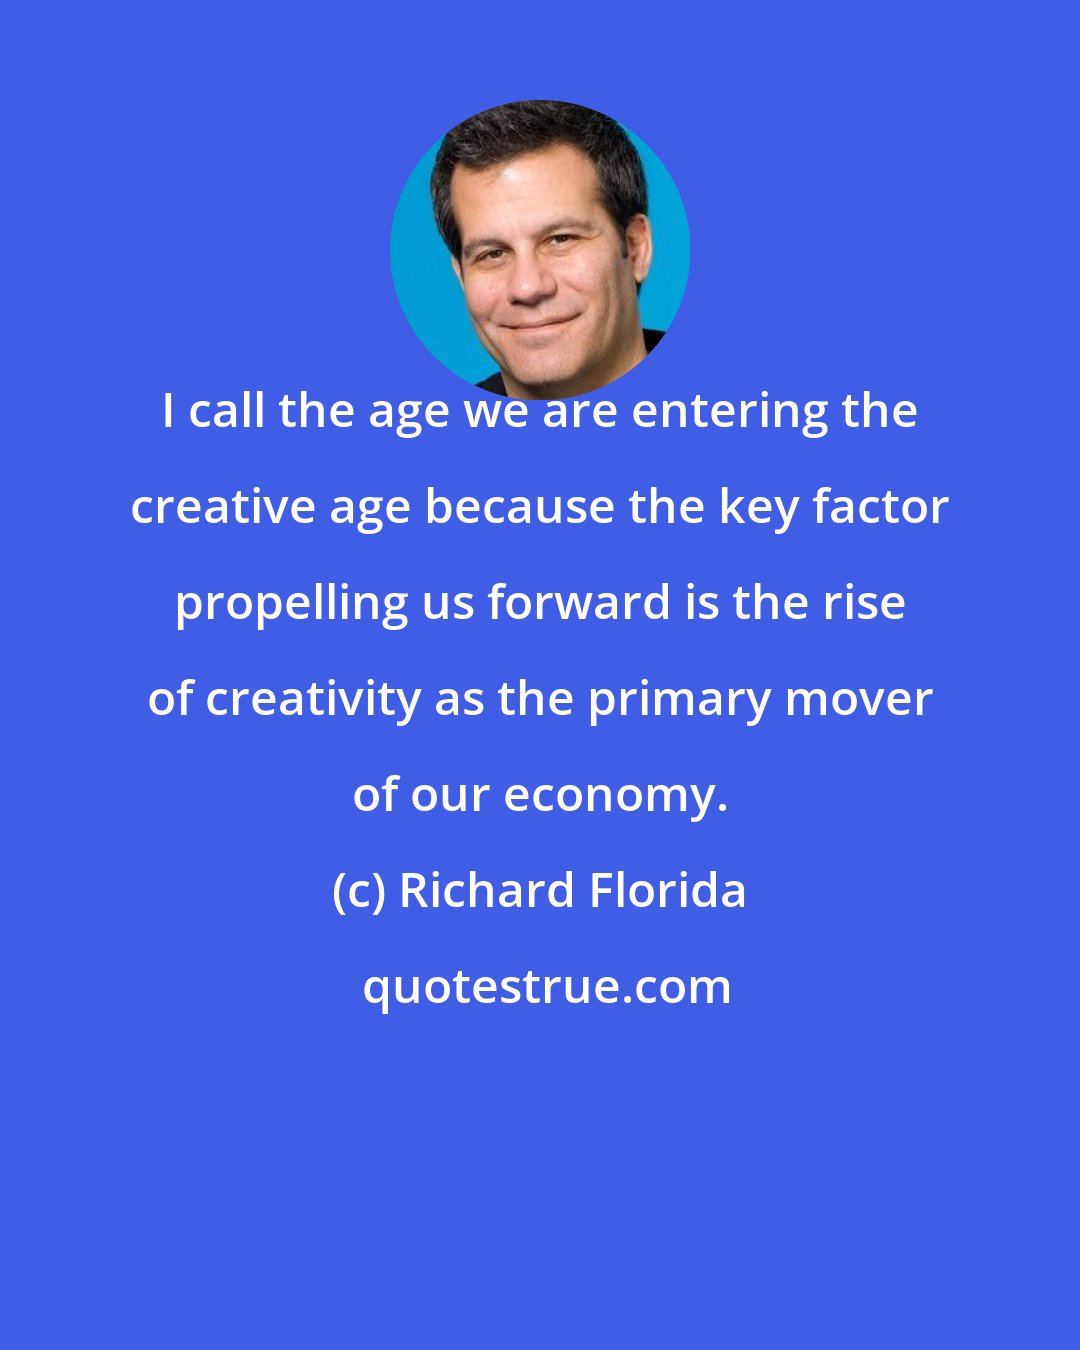 Richard Florida: I call the age we are entering the creative age because the key factor propelling us forward is the rise of creativity as the primary mover of our economy.